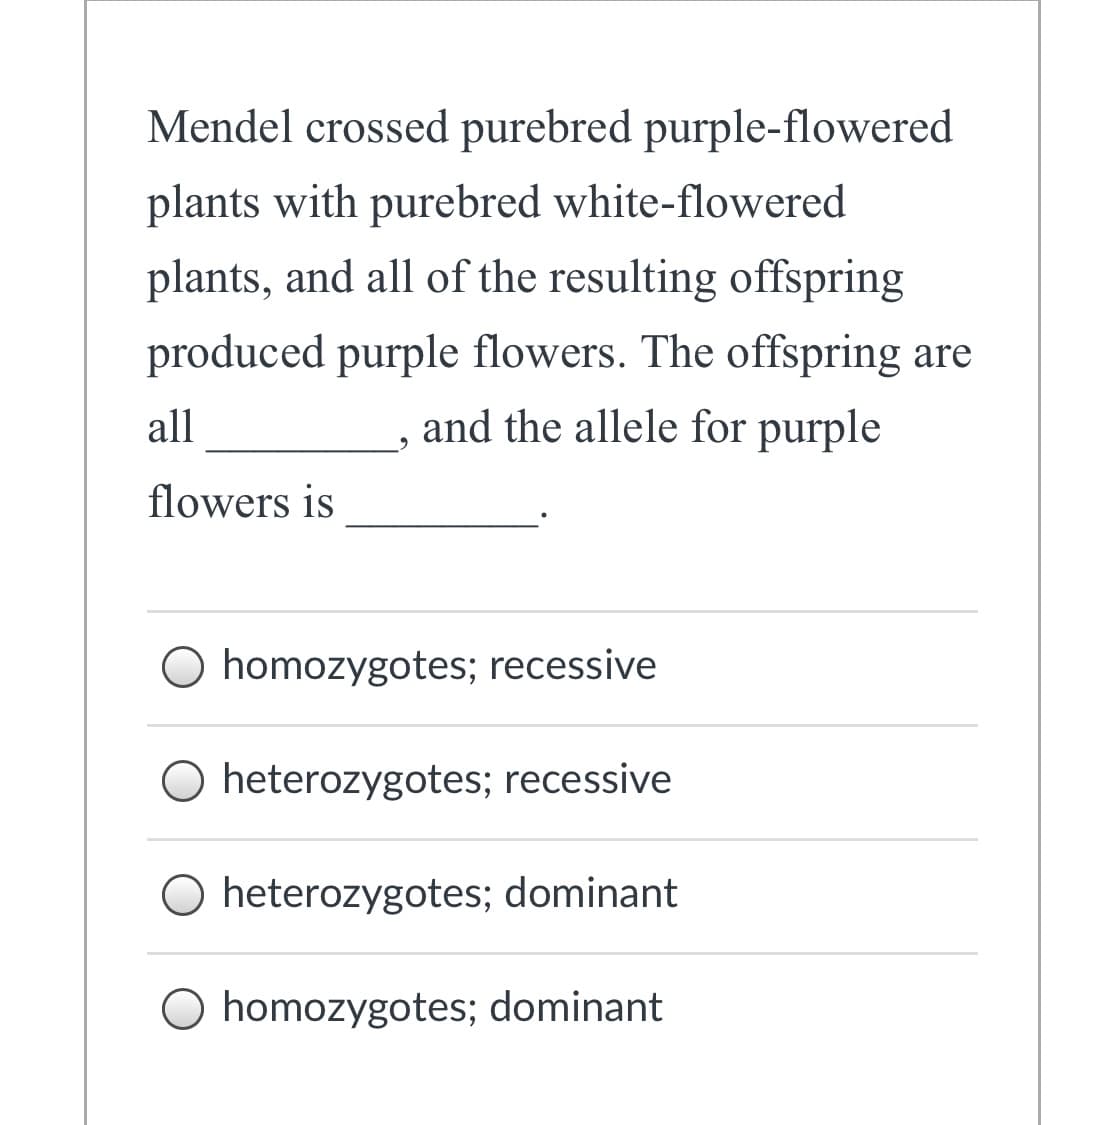 Mendel crossed purebred purple-flowered
plants with purebred white-flowered
plants, and all of the resulting offspring
produced purple flowers. The offspring are
all
and the allele for purple
flowers is
O homozygotes; recessive
O heterozygotes; recessive
O heterozygotes; dominant
homozygotes; dominant
